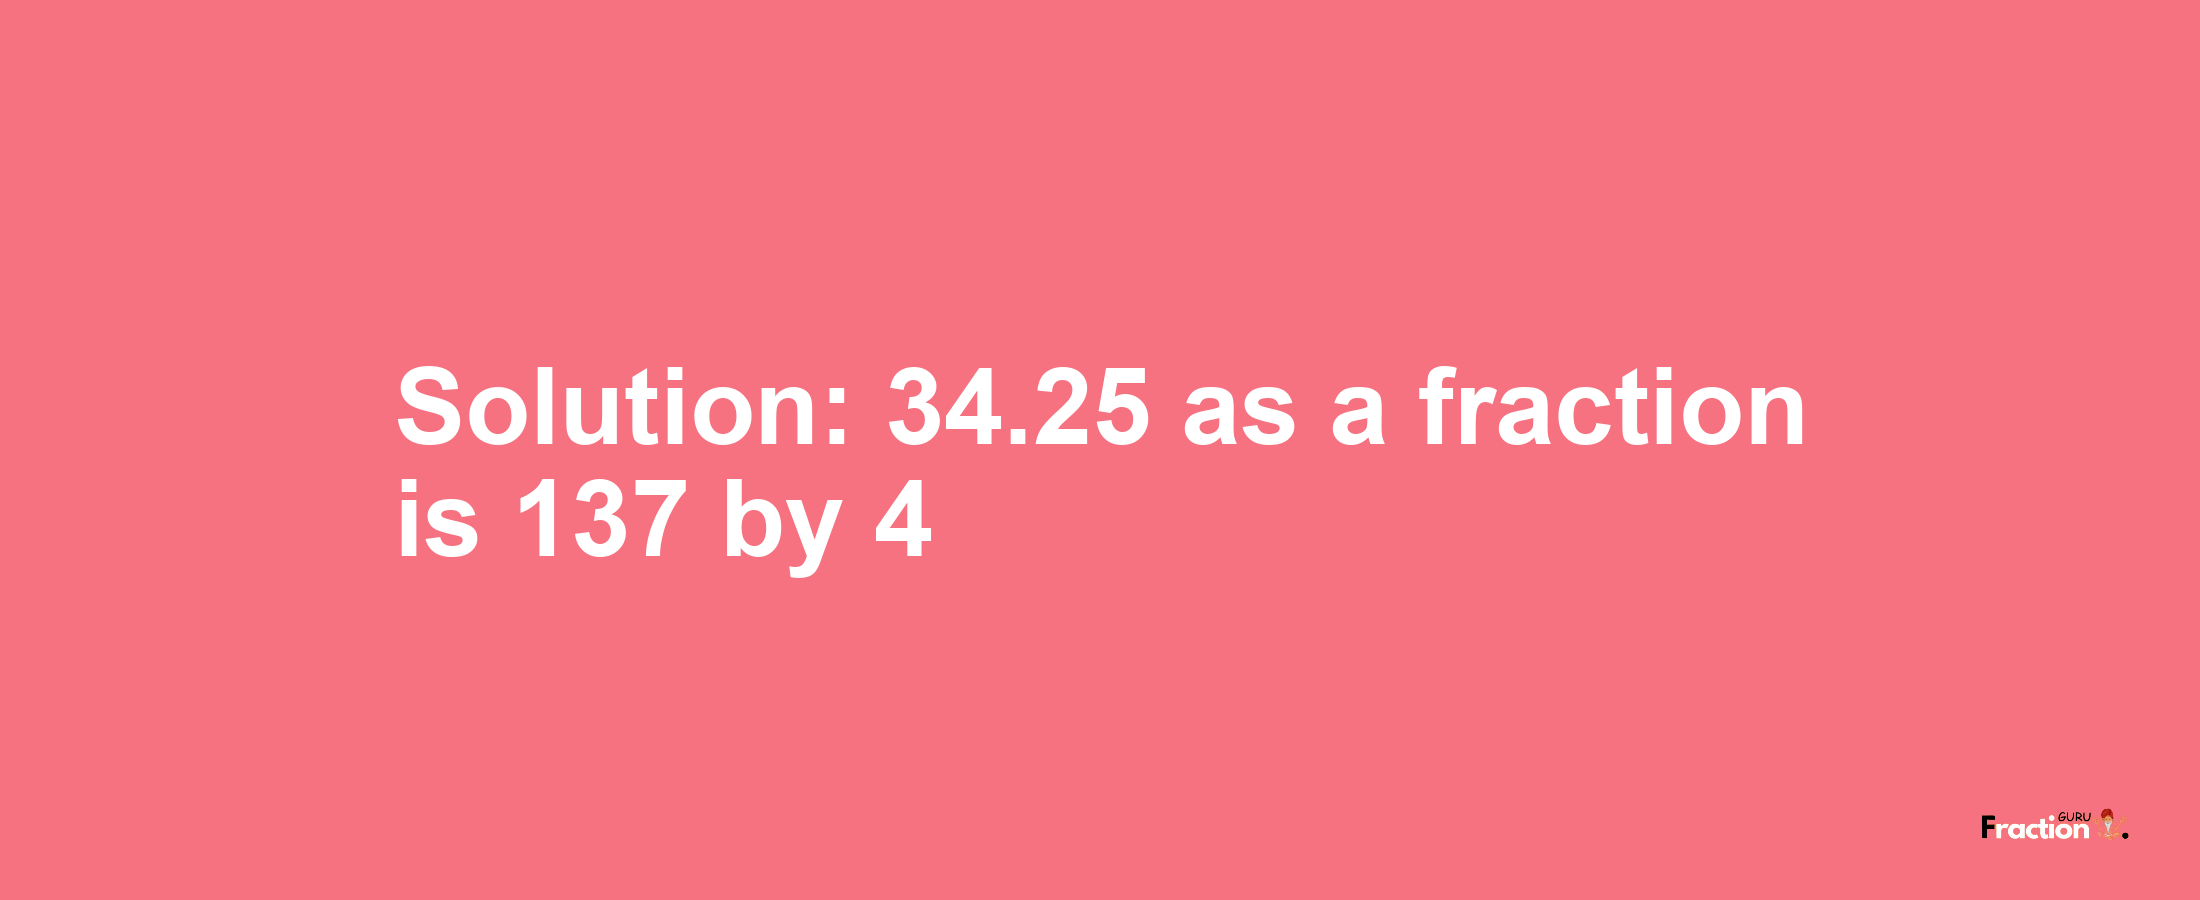 Solution:34.25 as a fraction is 137/4